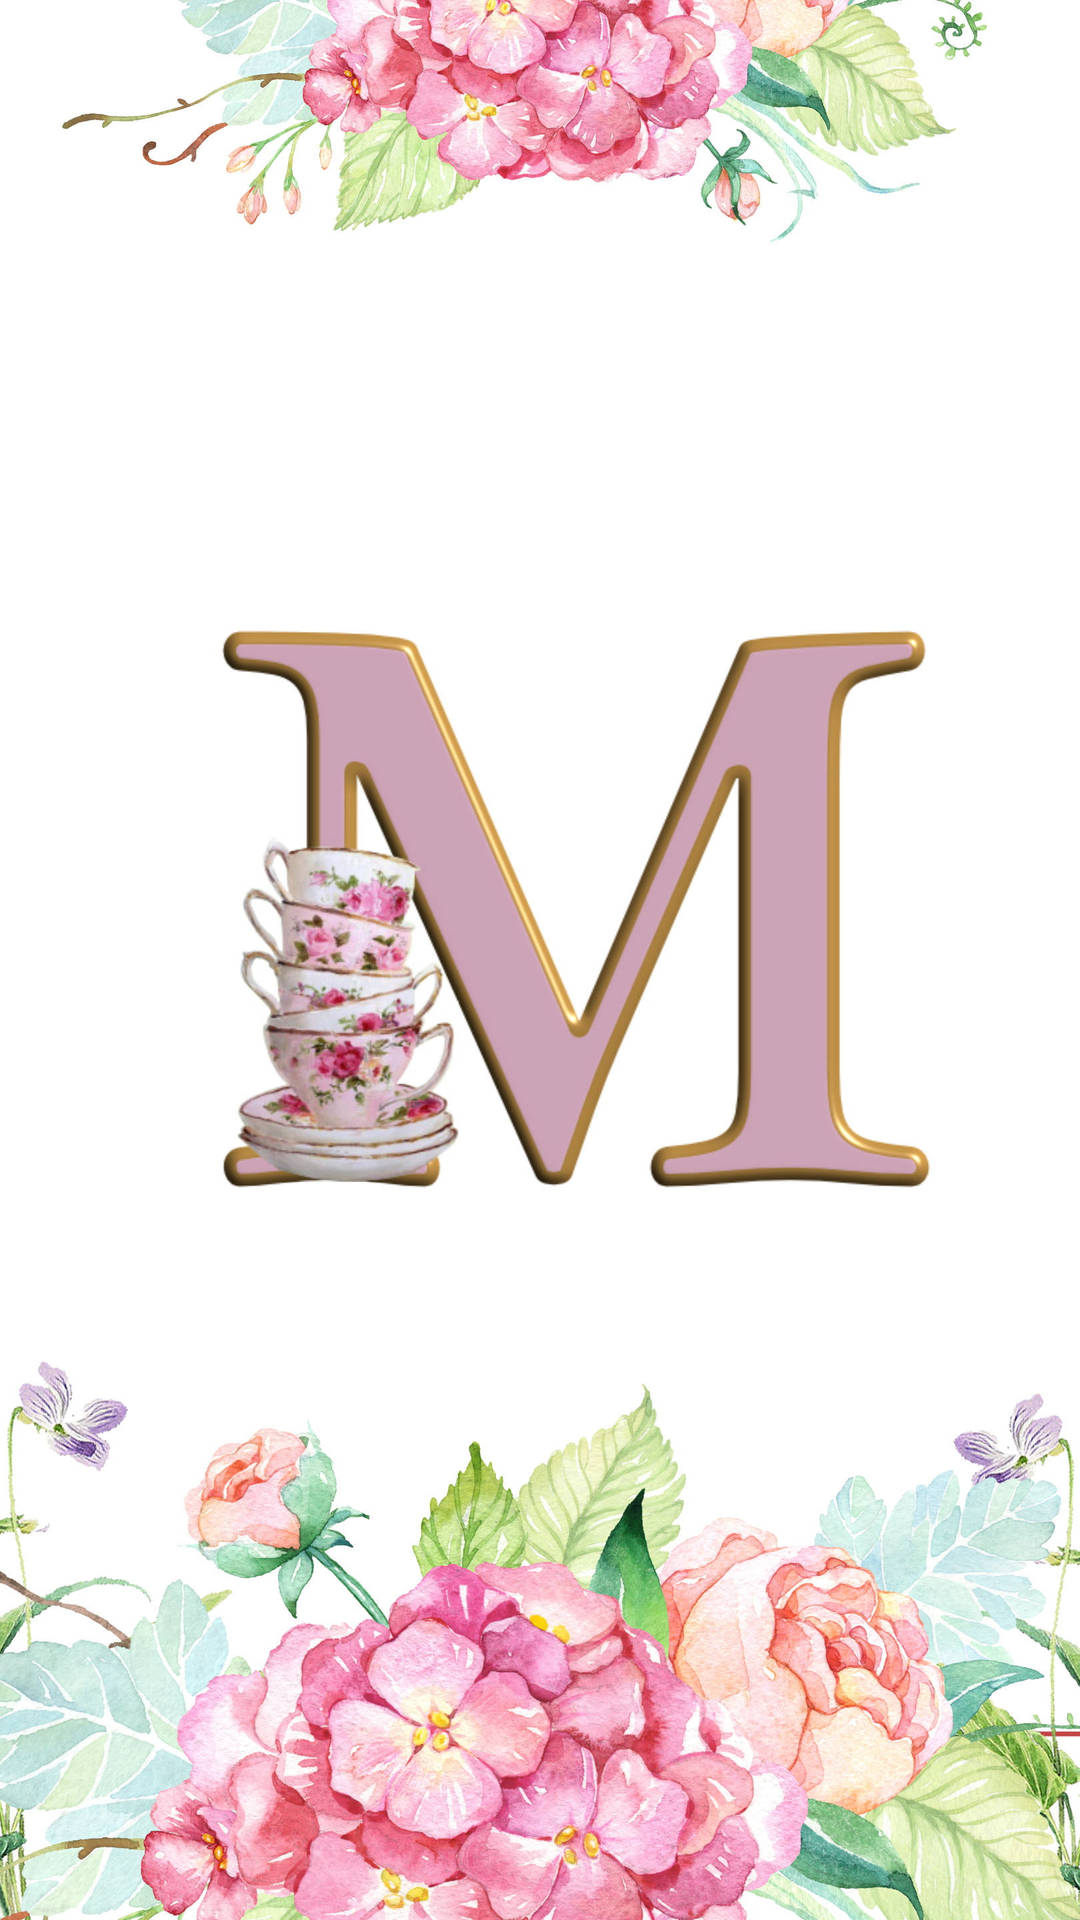 Marvelous M - Beautifully Arranged Letter M Designed With Tea Cups